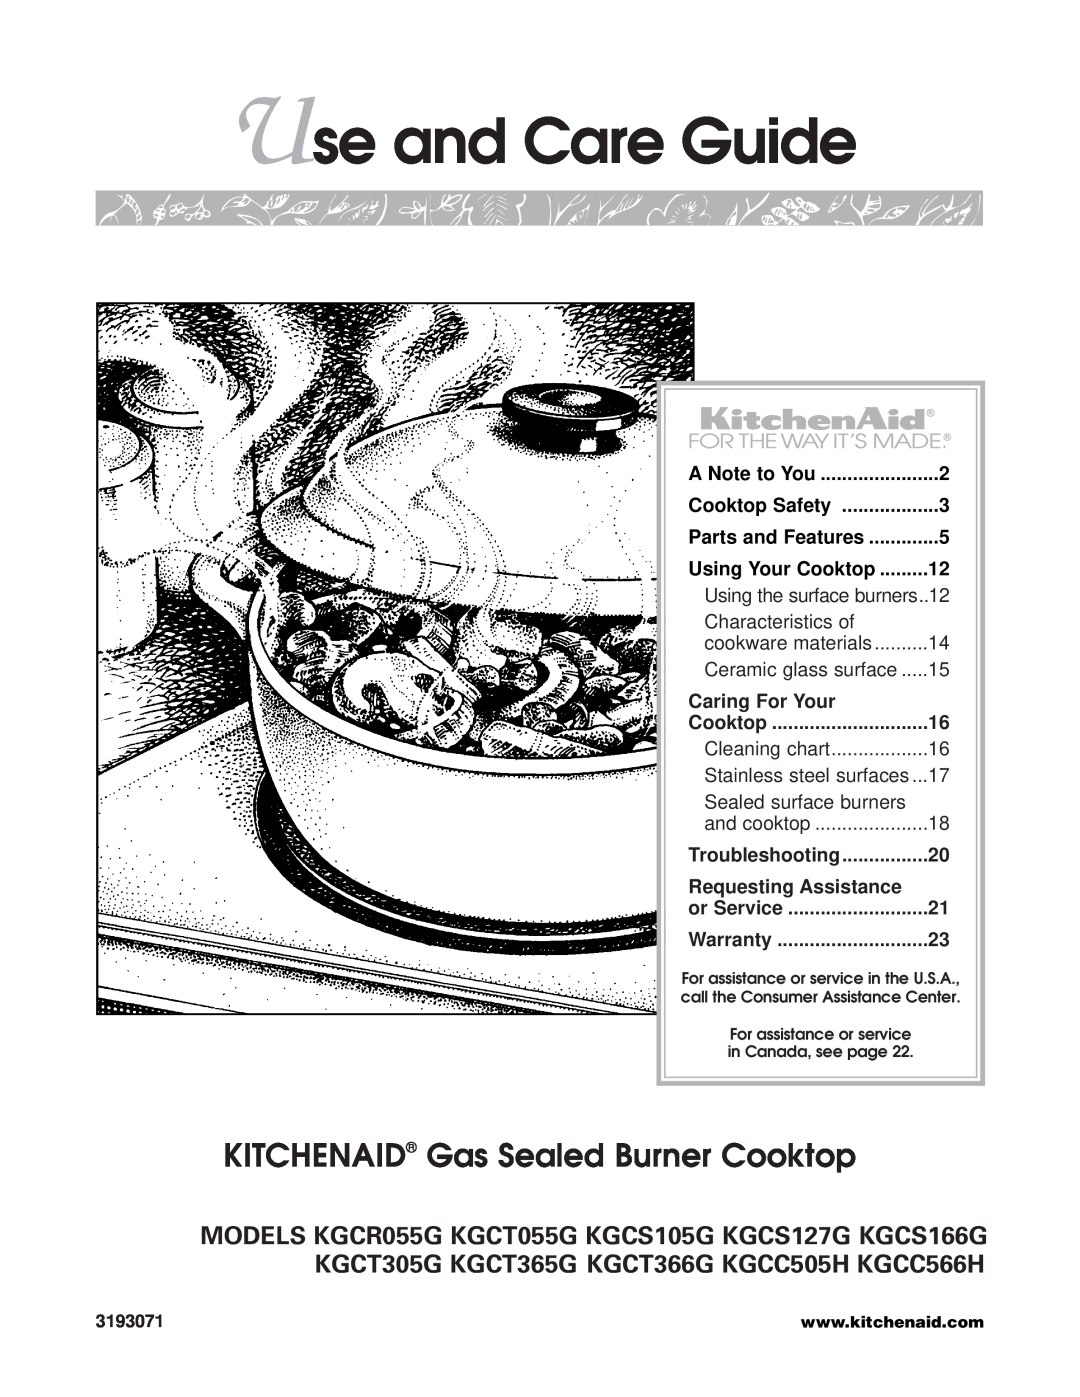 KitchenAid KGCC566H warranty KITCHENAID Gas Sealed Burner Cooktop, Use and Care Guide, Characteristics of, Caring For Your 